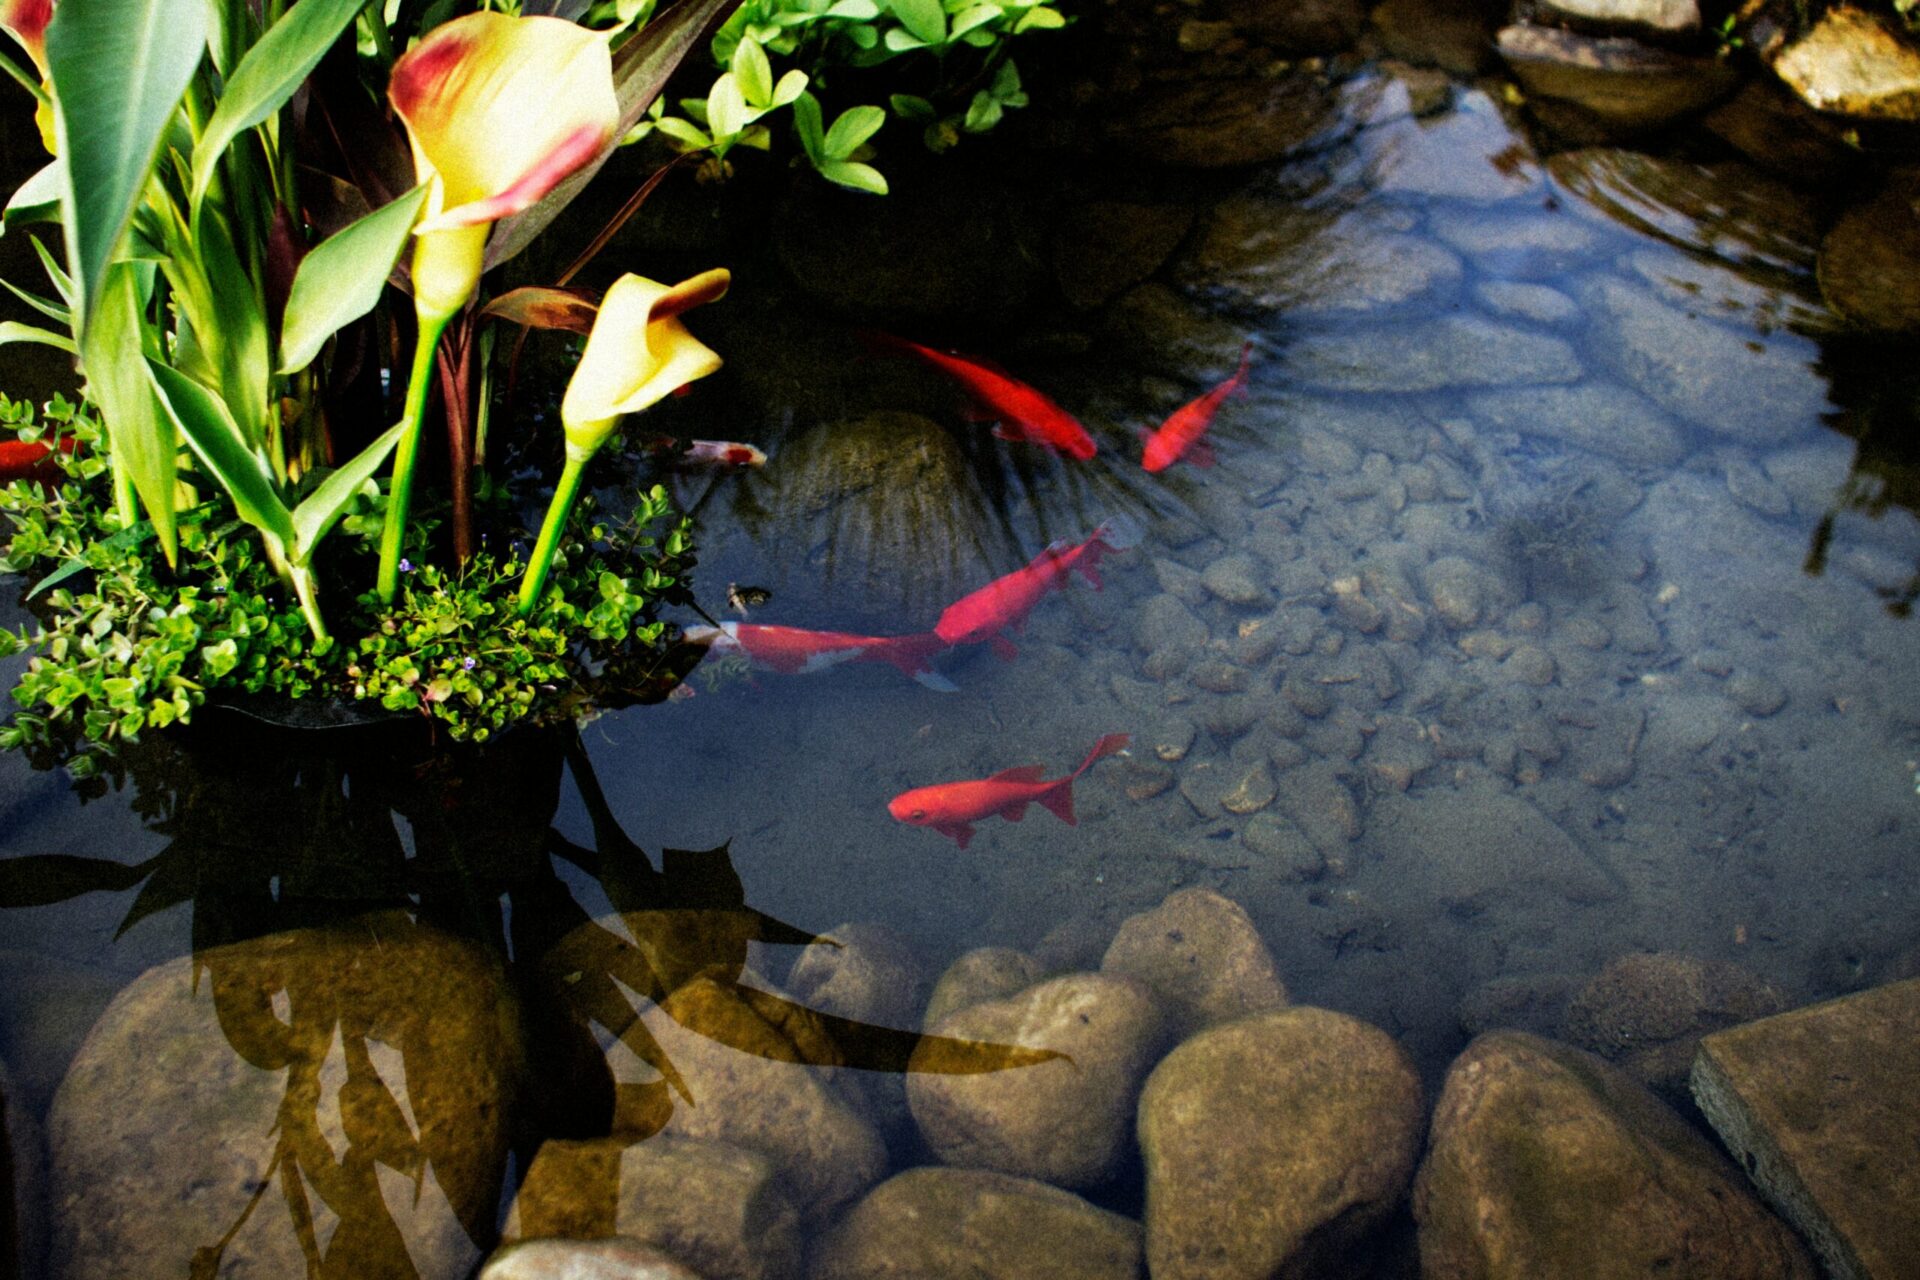 A pond with fish in it.